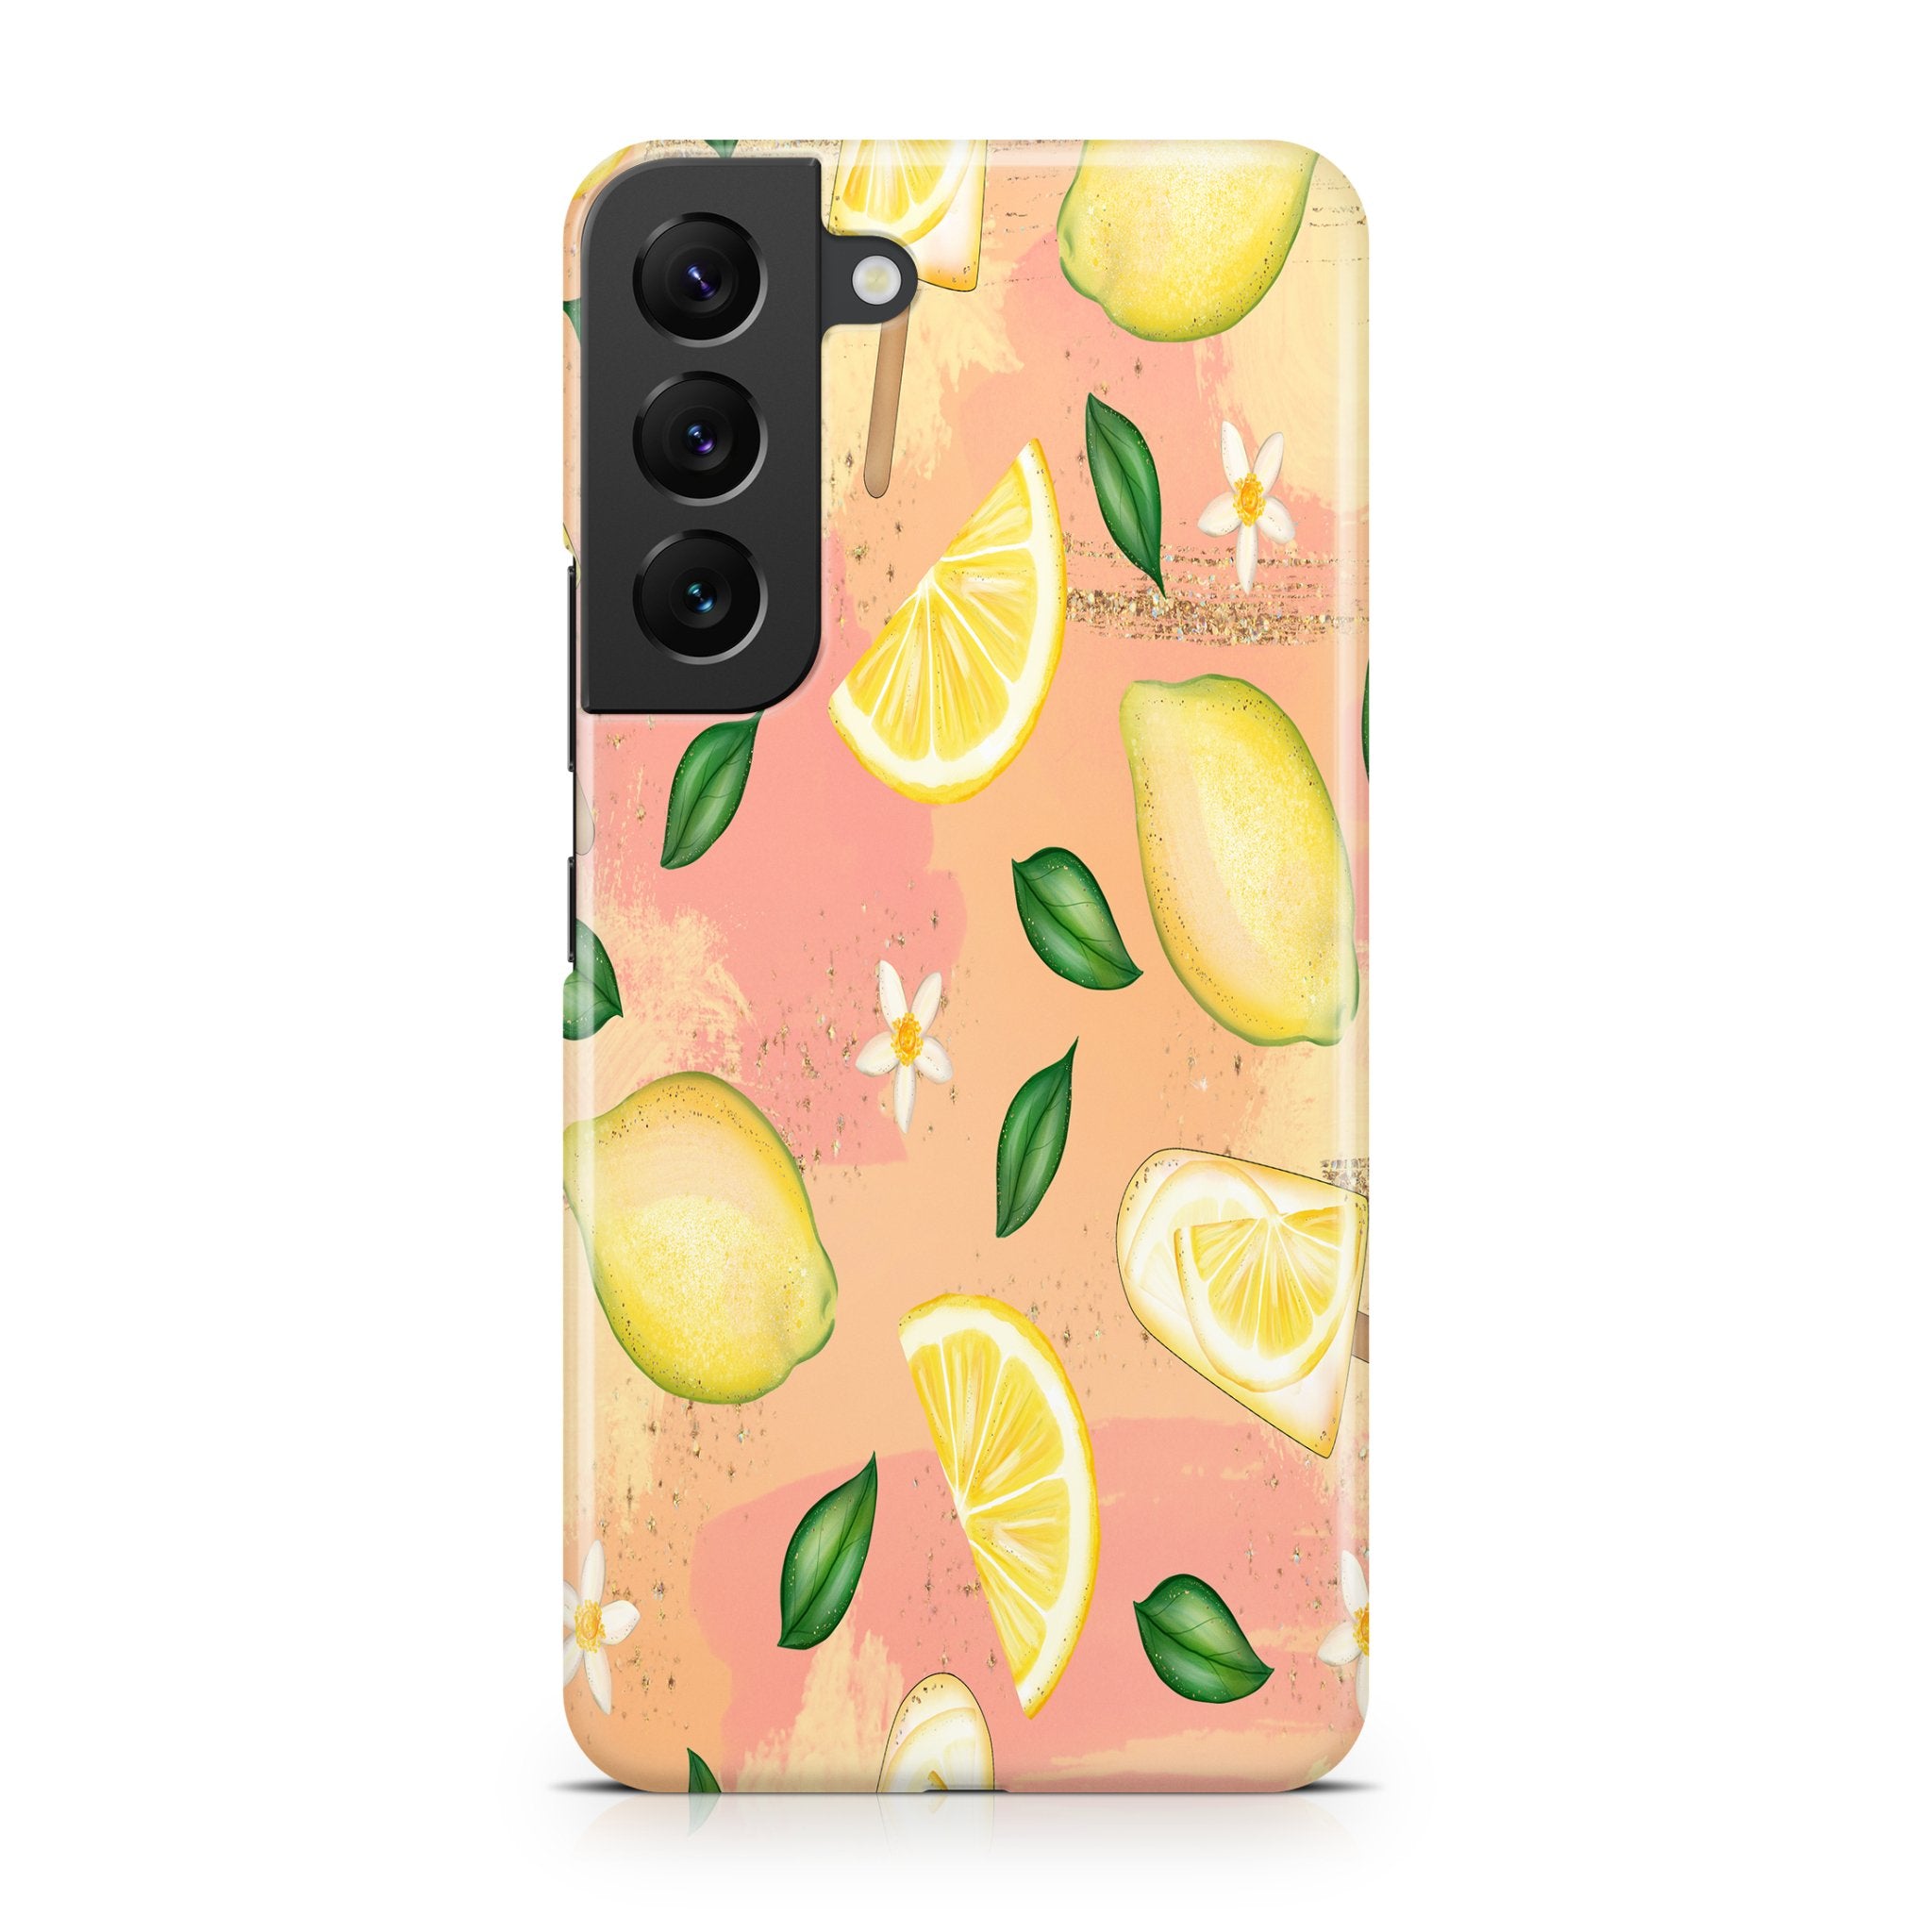 Lolly Ice - Samsung phone case designs by CaseSwagger